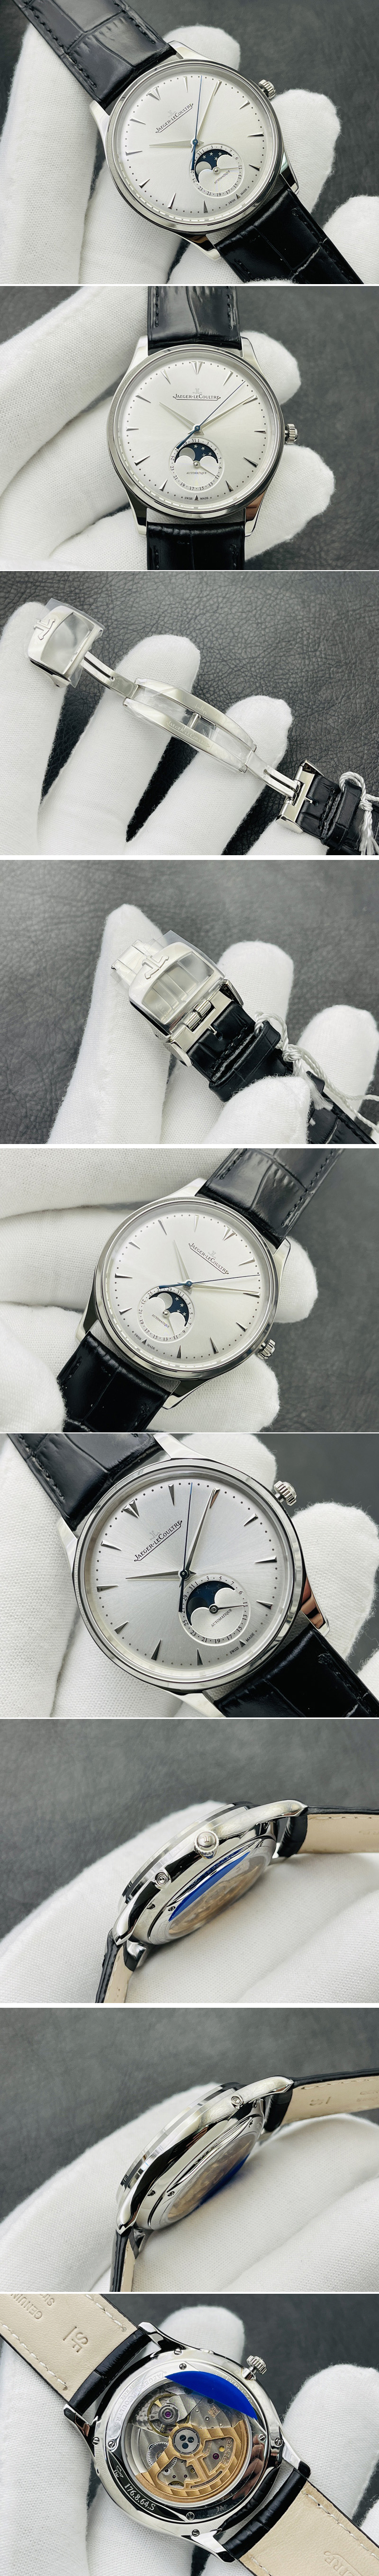 Replica Jaeger-LeCoultre Master Ultra Thin Moon 1368420 SS ZF 1:1 Best Edition White Dial on Black Leather Strap A925